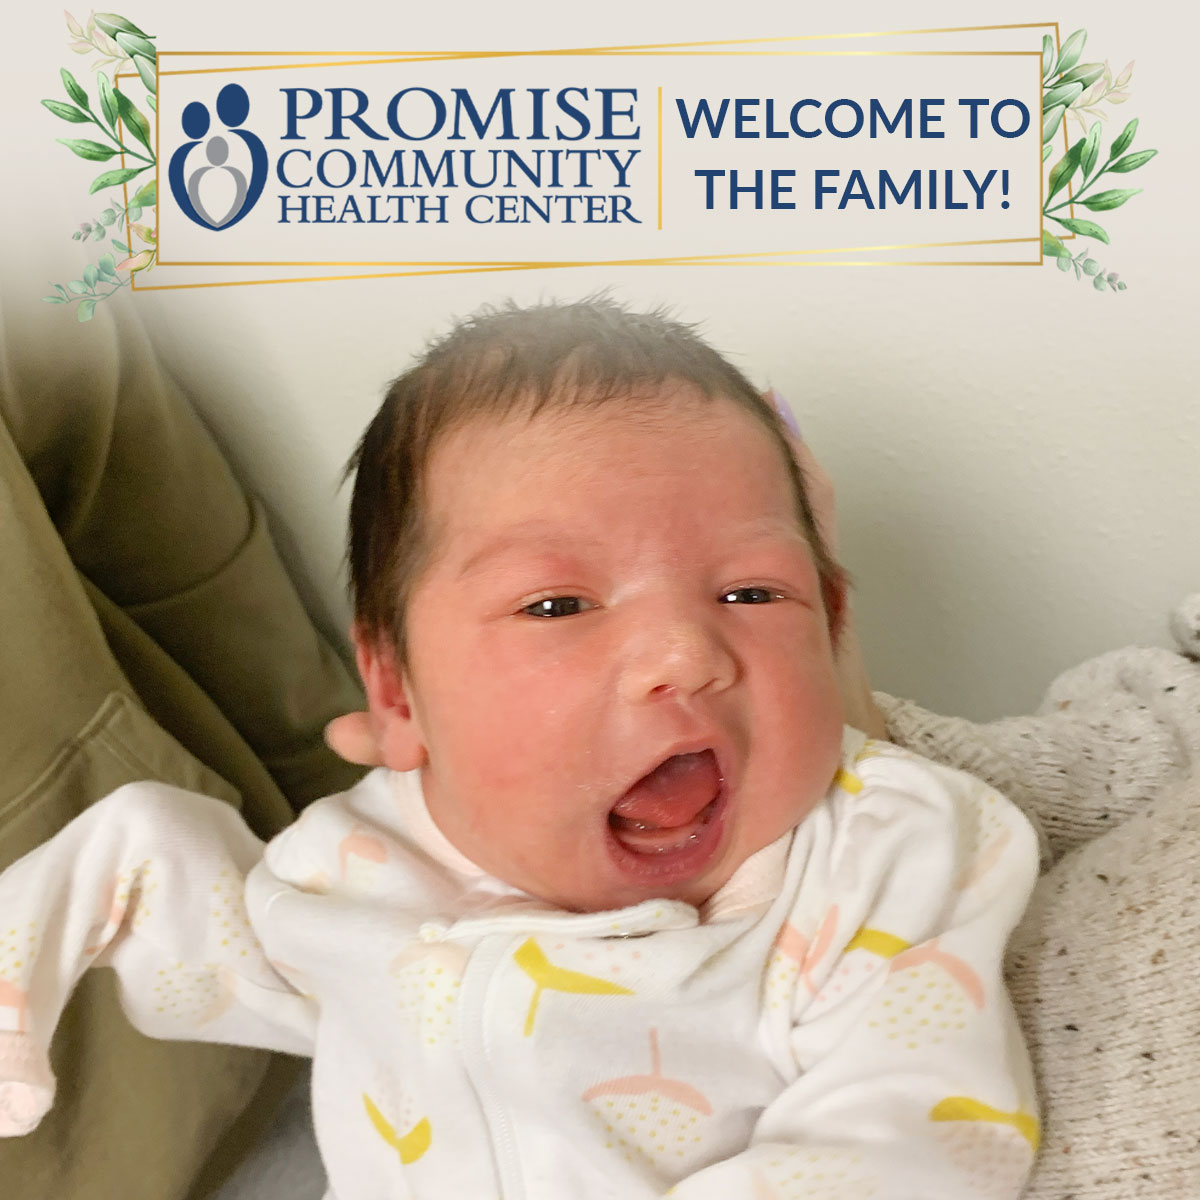 Promise Community Health Center in Sioux Center, Iowa | Midwives in northwest Iowa, Midwives in southeast South Dakota, Midwives in southwest Minnesota | Midwives in Sioux Falls South Dakota, Midwives in Beresford South Dakota, Midwives in Sioux City IA, Midwives in LeMars IA, Midwives in Worthington MN, Midwives in Iowa, Midwives in South Dakota, Midwives in Minnesota